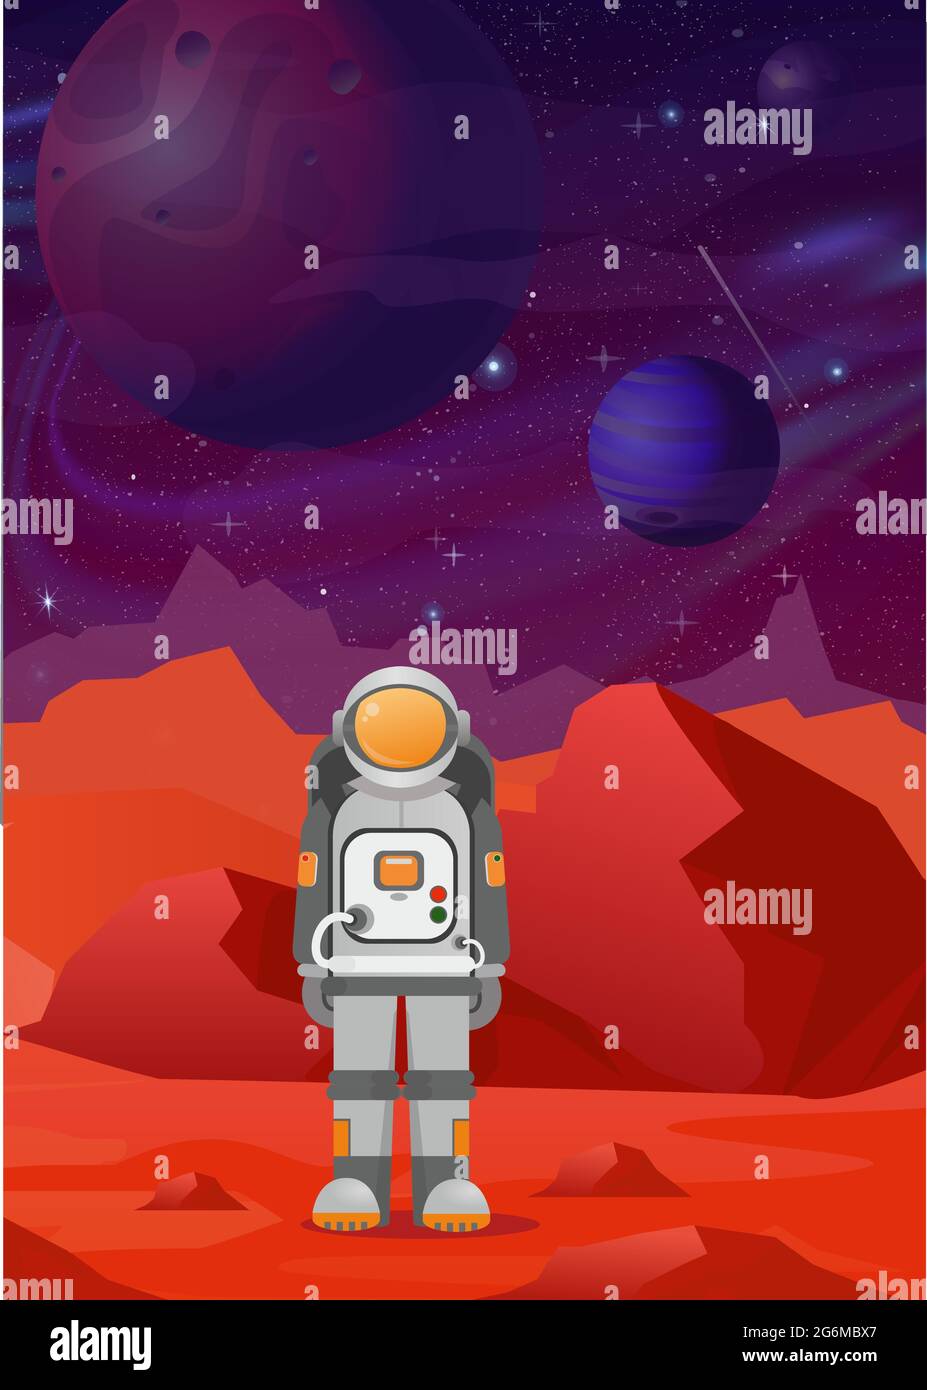 Vector illustrations of astronaut on Mars. red mountains landscape on dark space with planets background. astronomy, space exploration, colonization Stock Vector